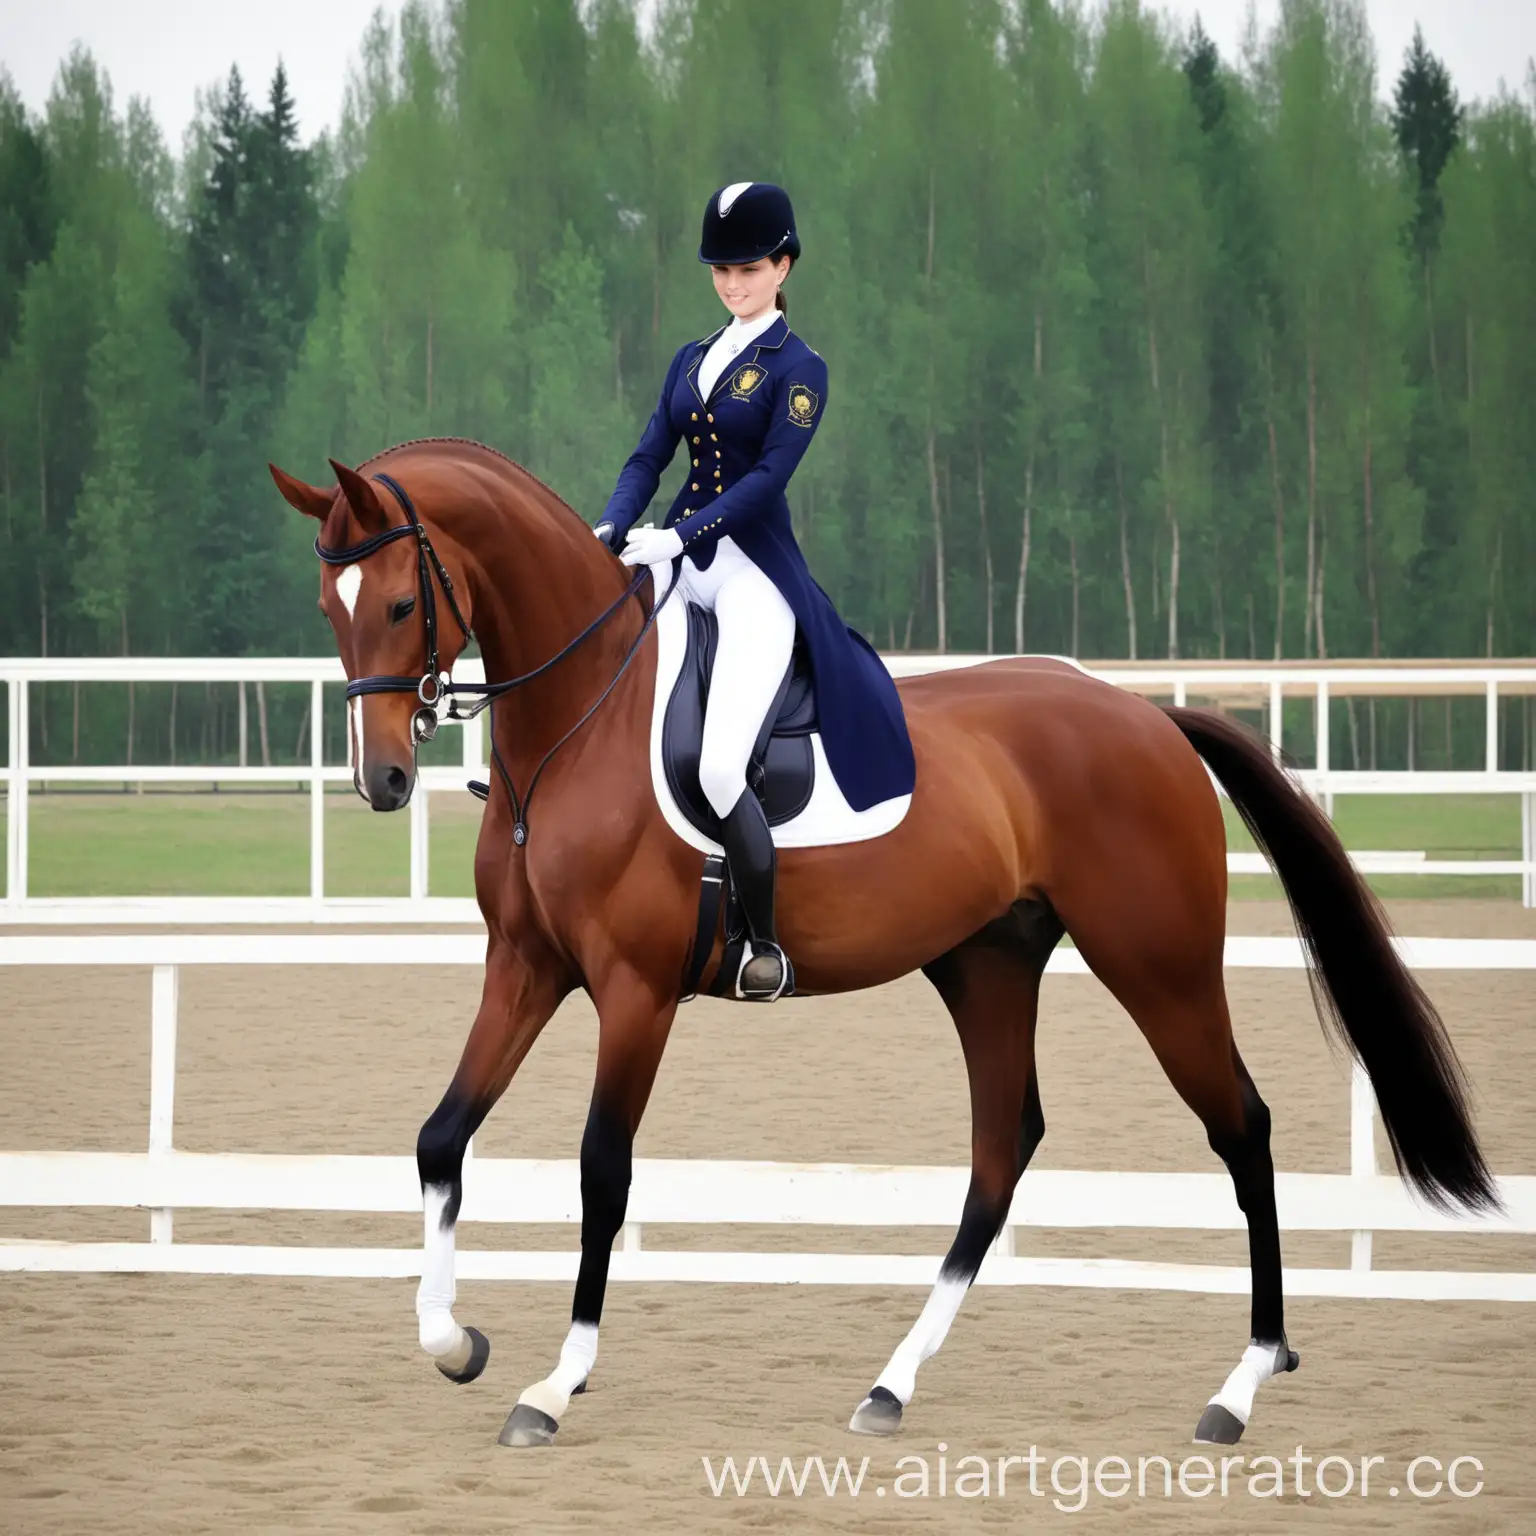 Equestrian-Training-Rider-Engaged-in-Dressage-Practice